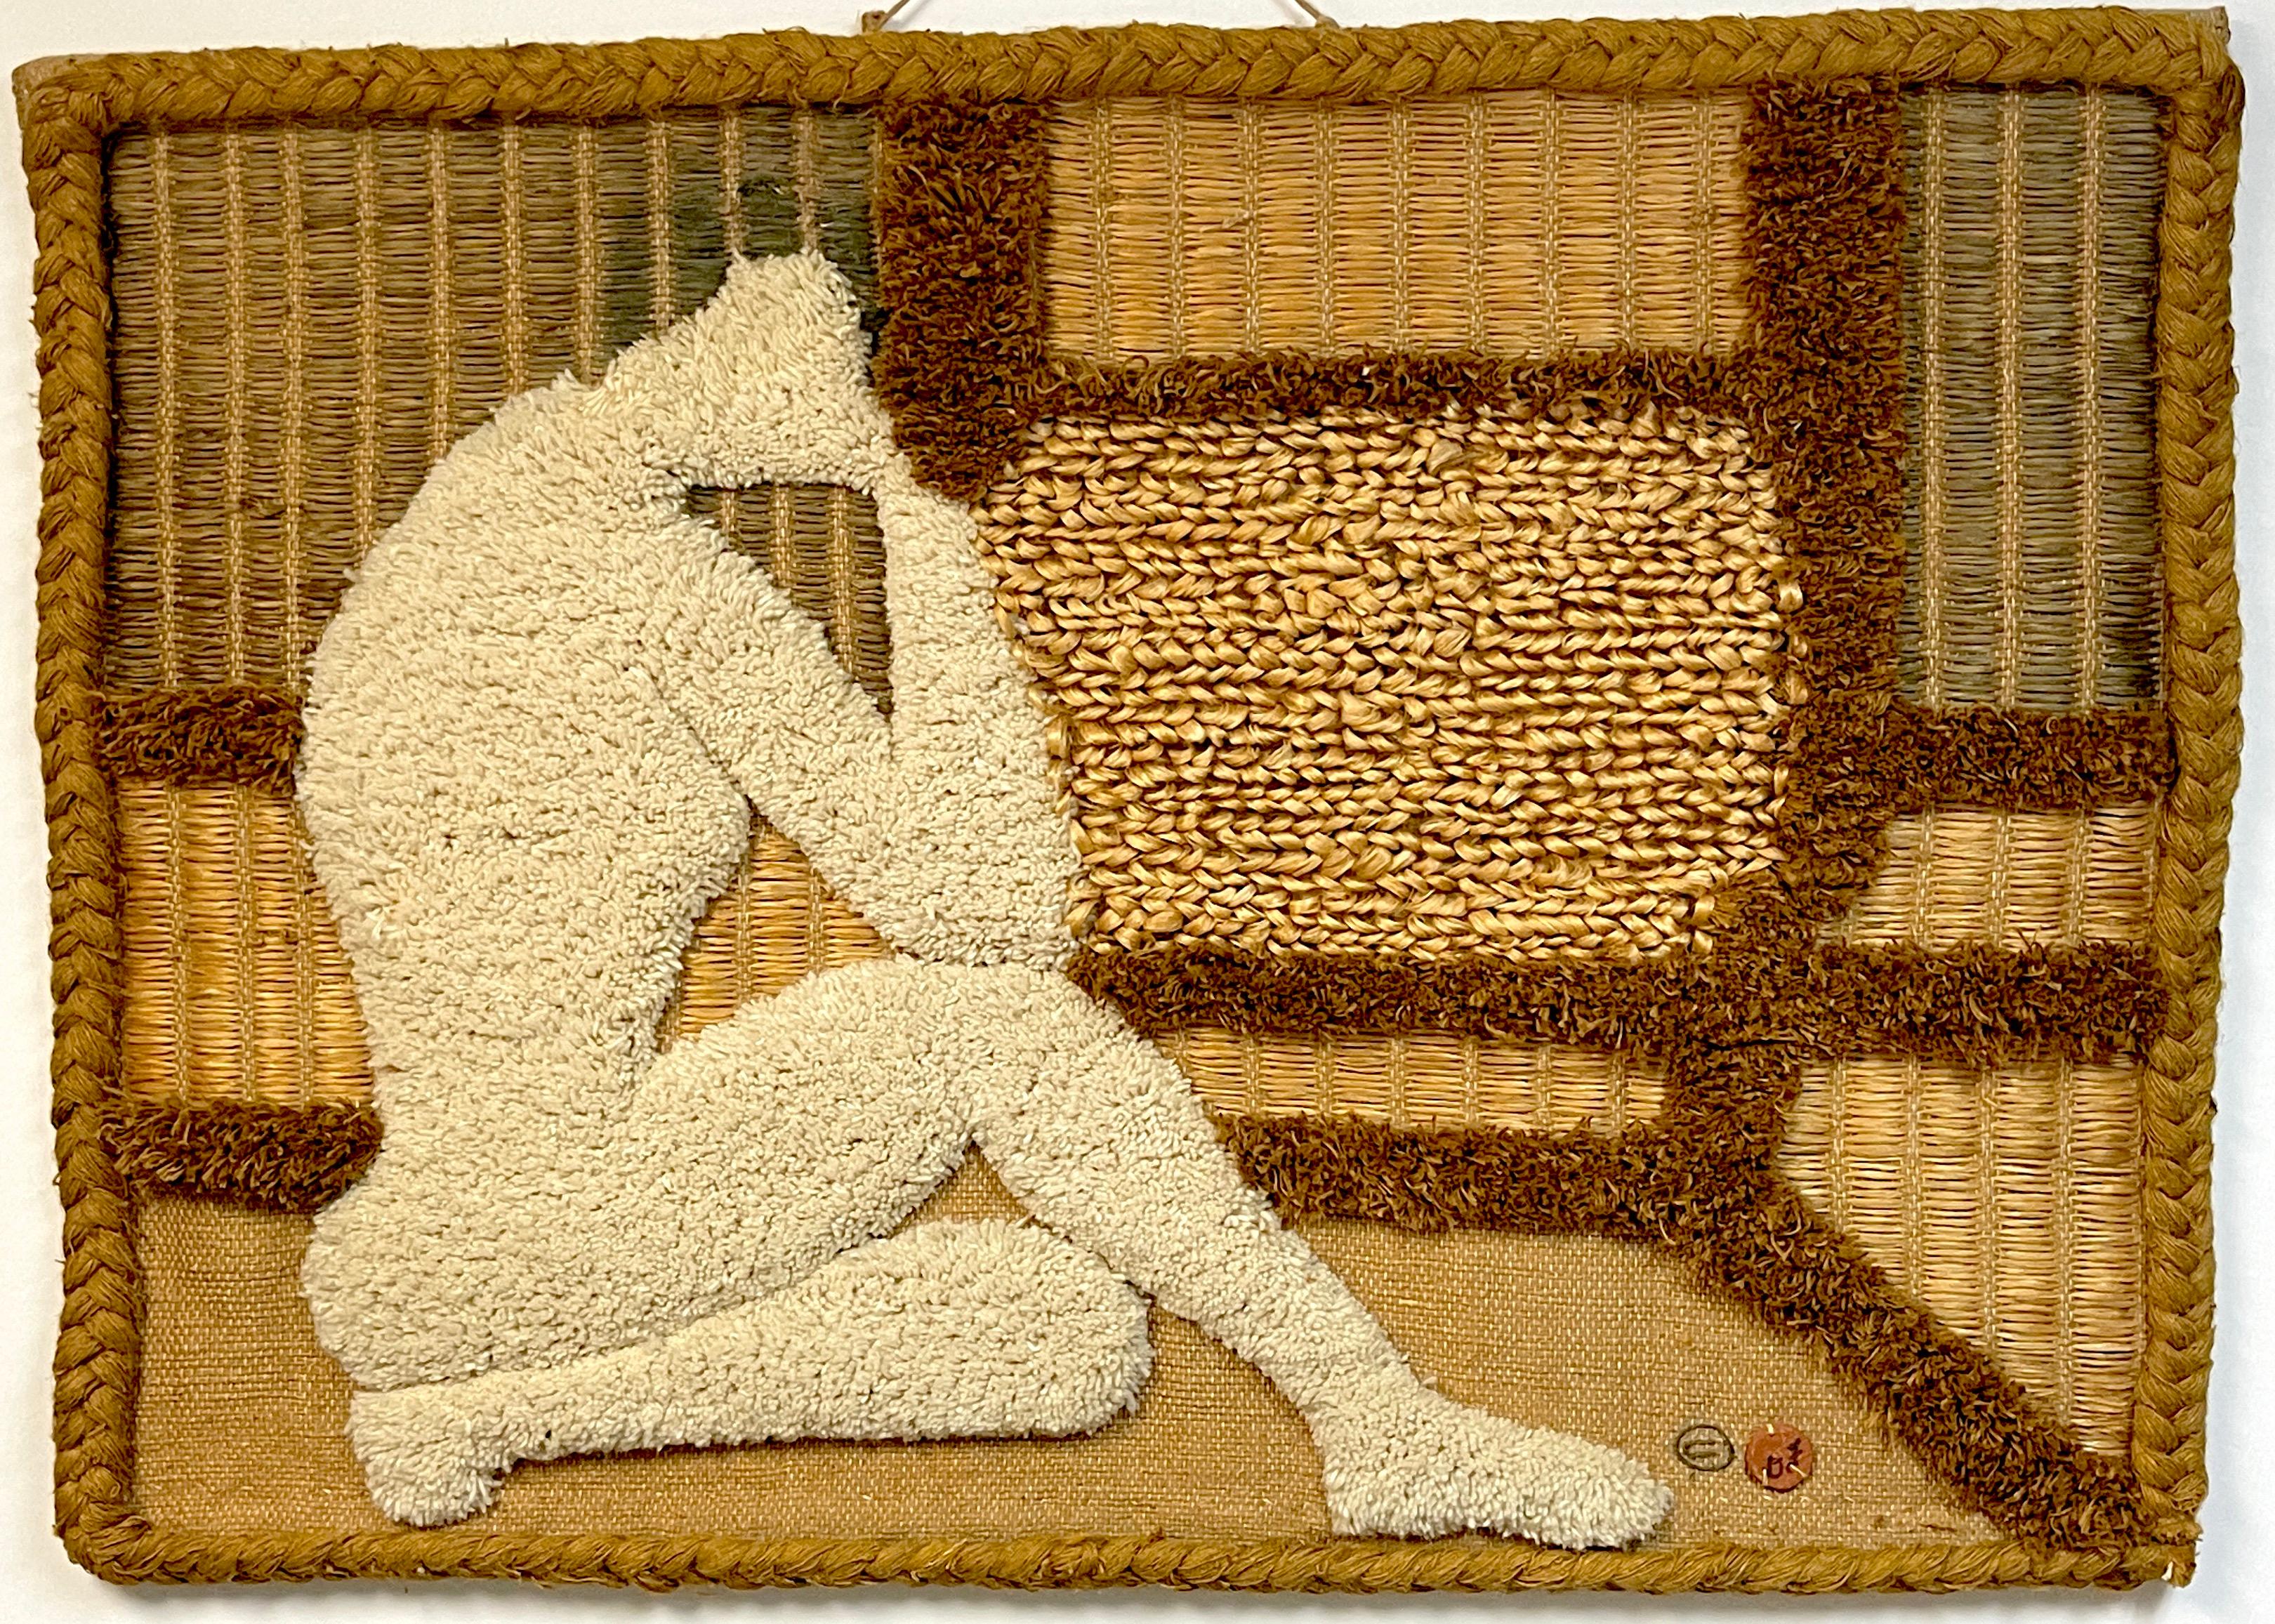 Natural fiber art wall tapestry 'Seated Nude' by Don Freedman, 1978
An exceptional large scale work, crafted of hand woven, jute, wool and cotton with a wooden hanging rod. A reflective seated naked figure in abstract interior, signed lower right